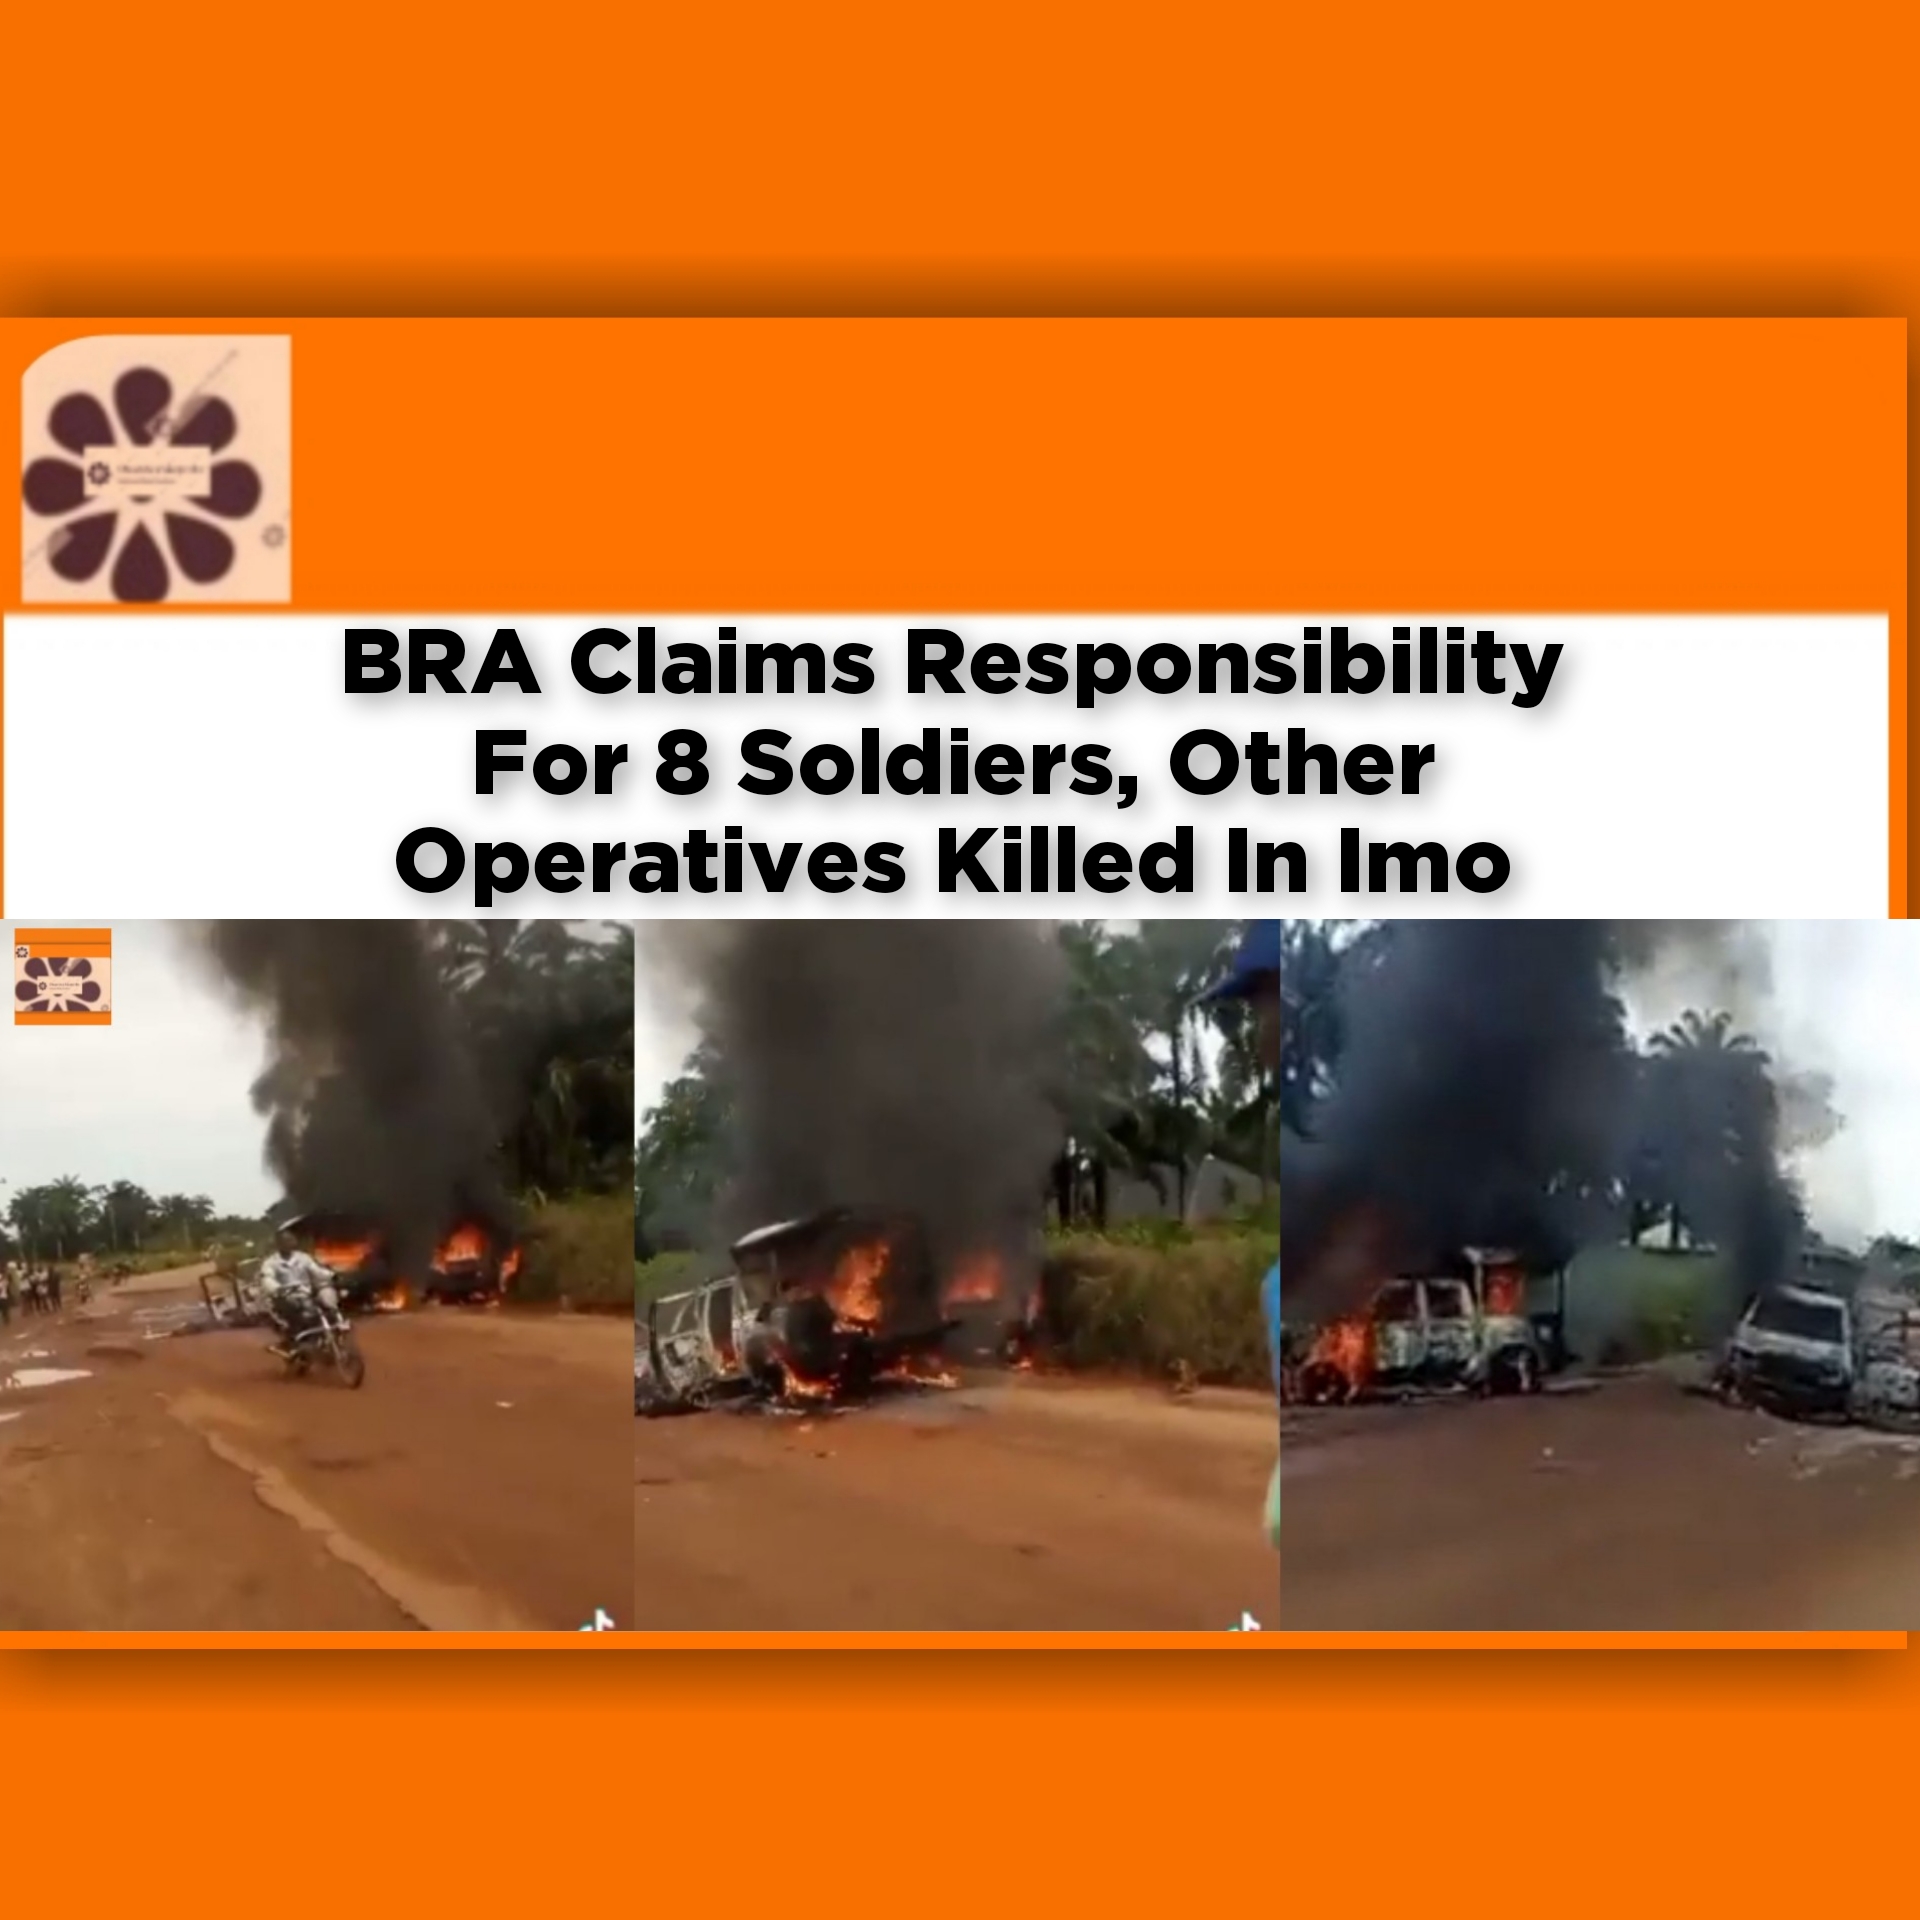 BRA Claims Responsibility For 8 Soldiers, Other Operatives Killed In Imo ~ OsazuwaAkonedo EFCC